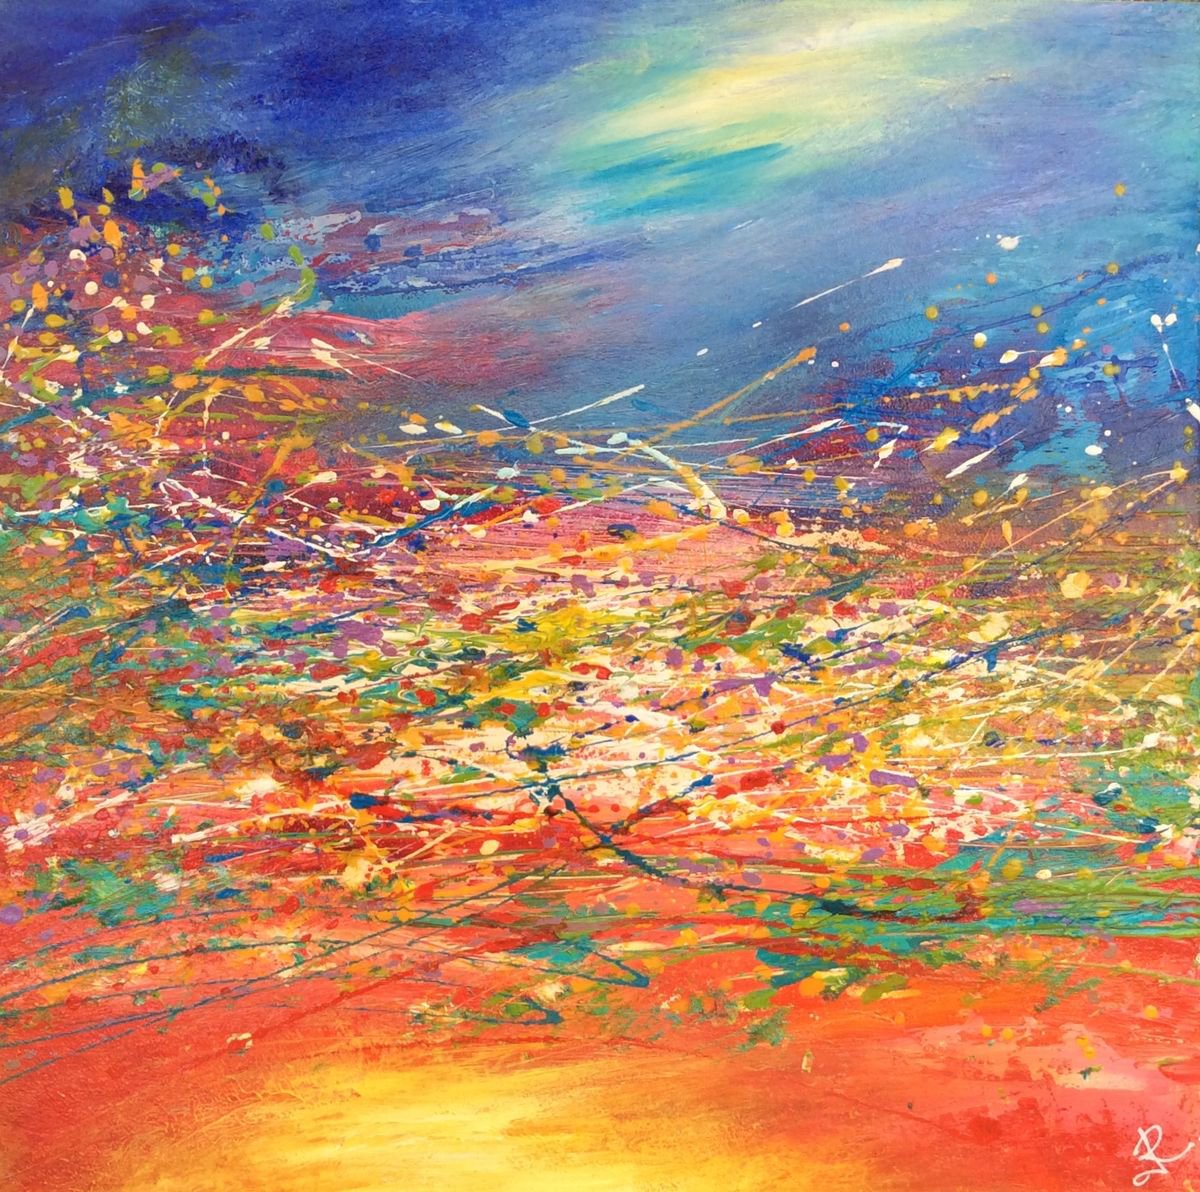 Abstract Floral Landscape at Sunset by Jan Rogers